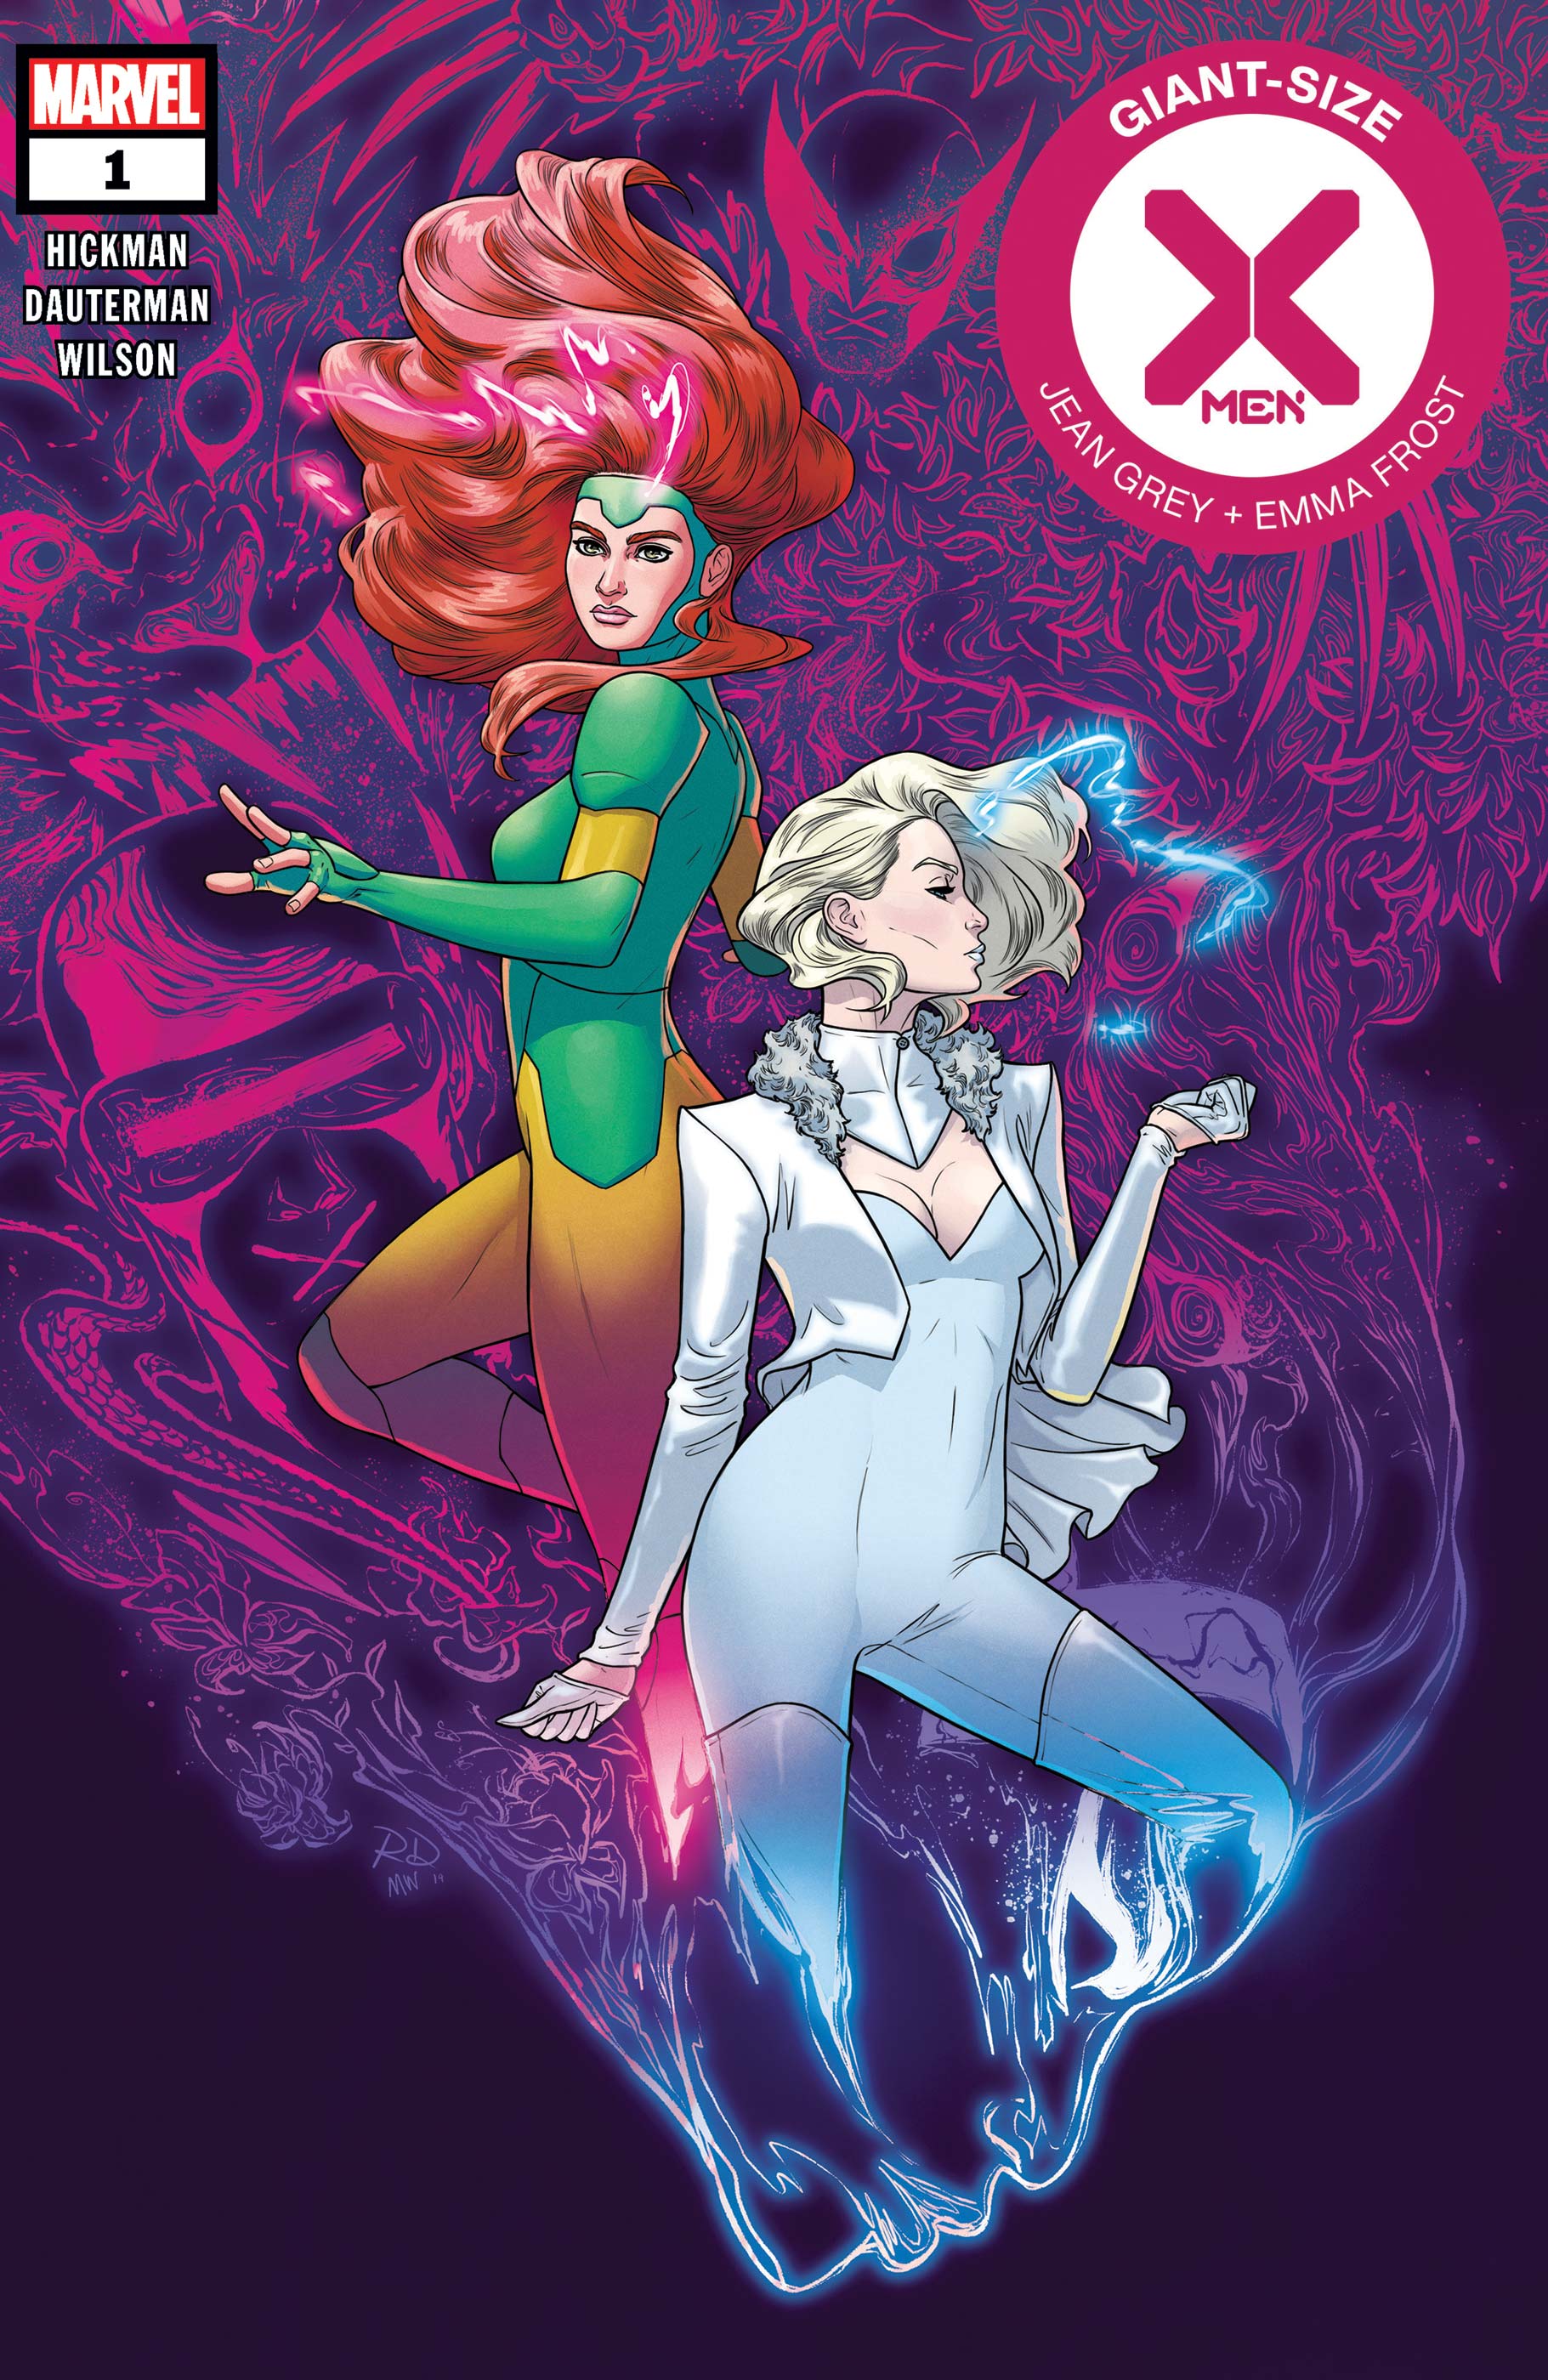 Giant Size X Men: Jean Grey And Emma Frost (2020)